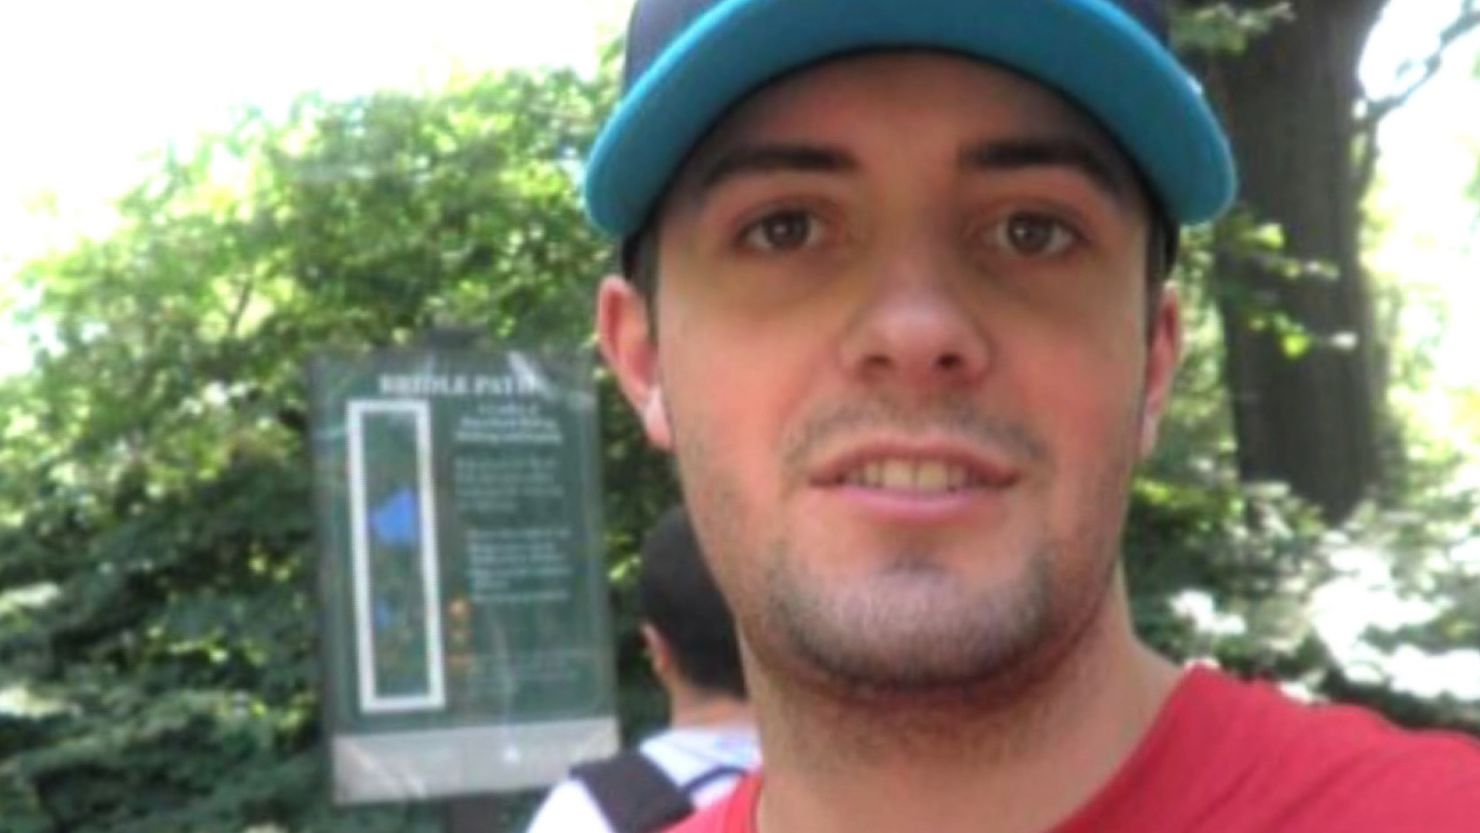 Christopher Lane was shot dead at random while jogging, police say.